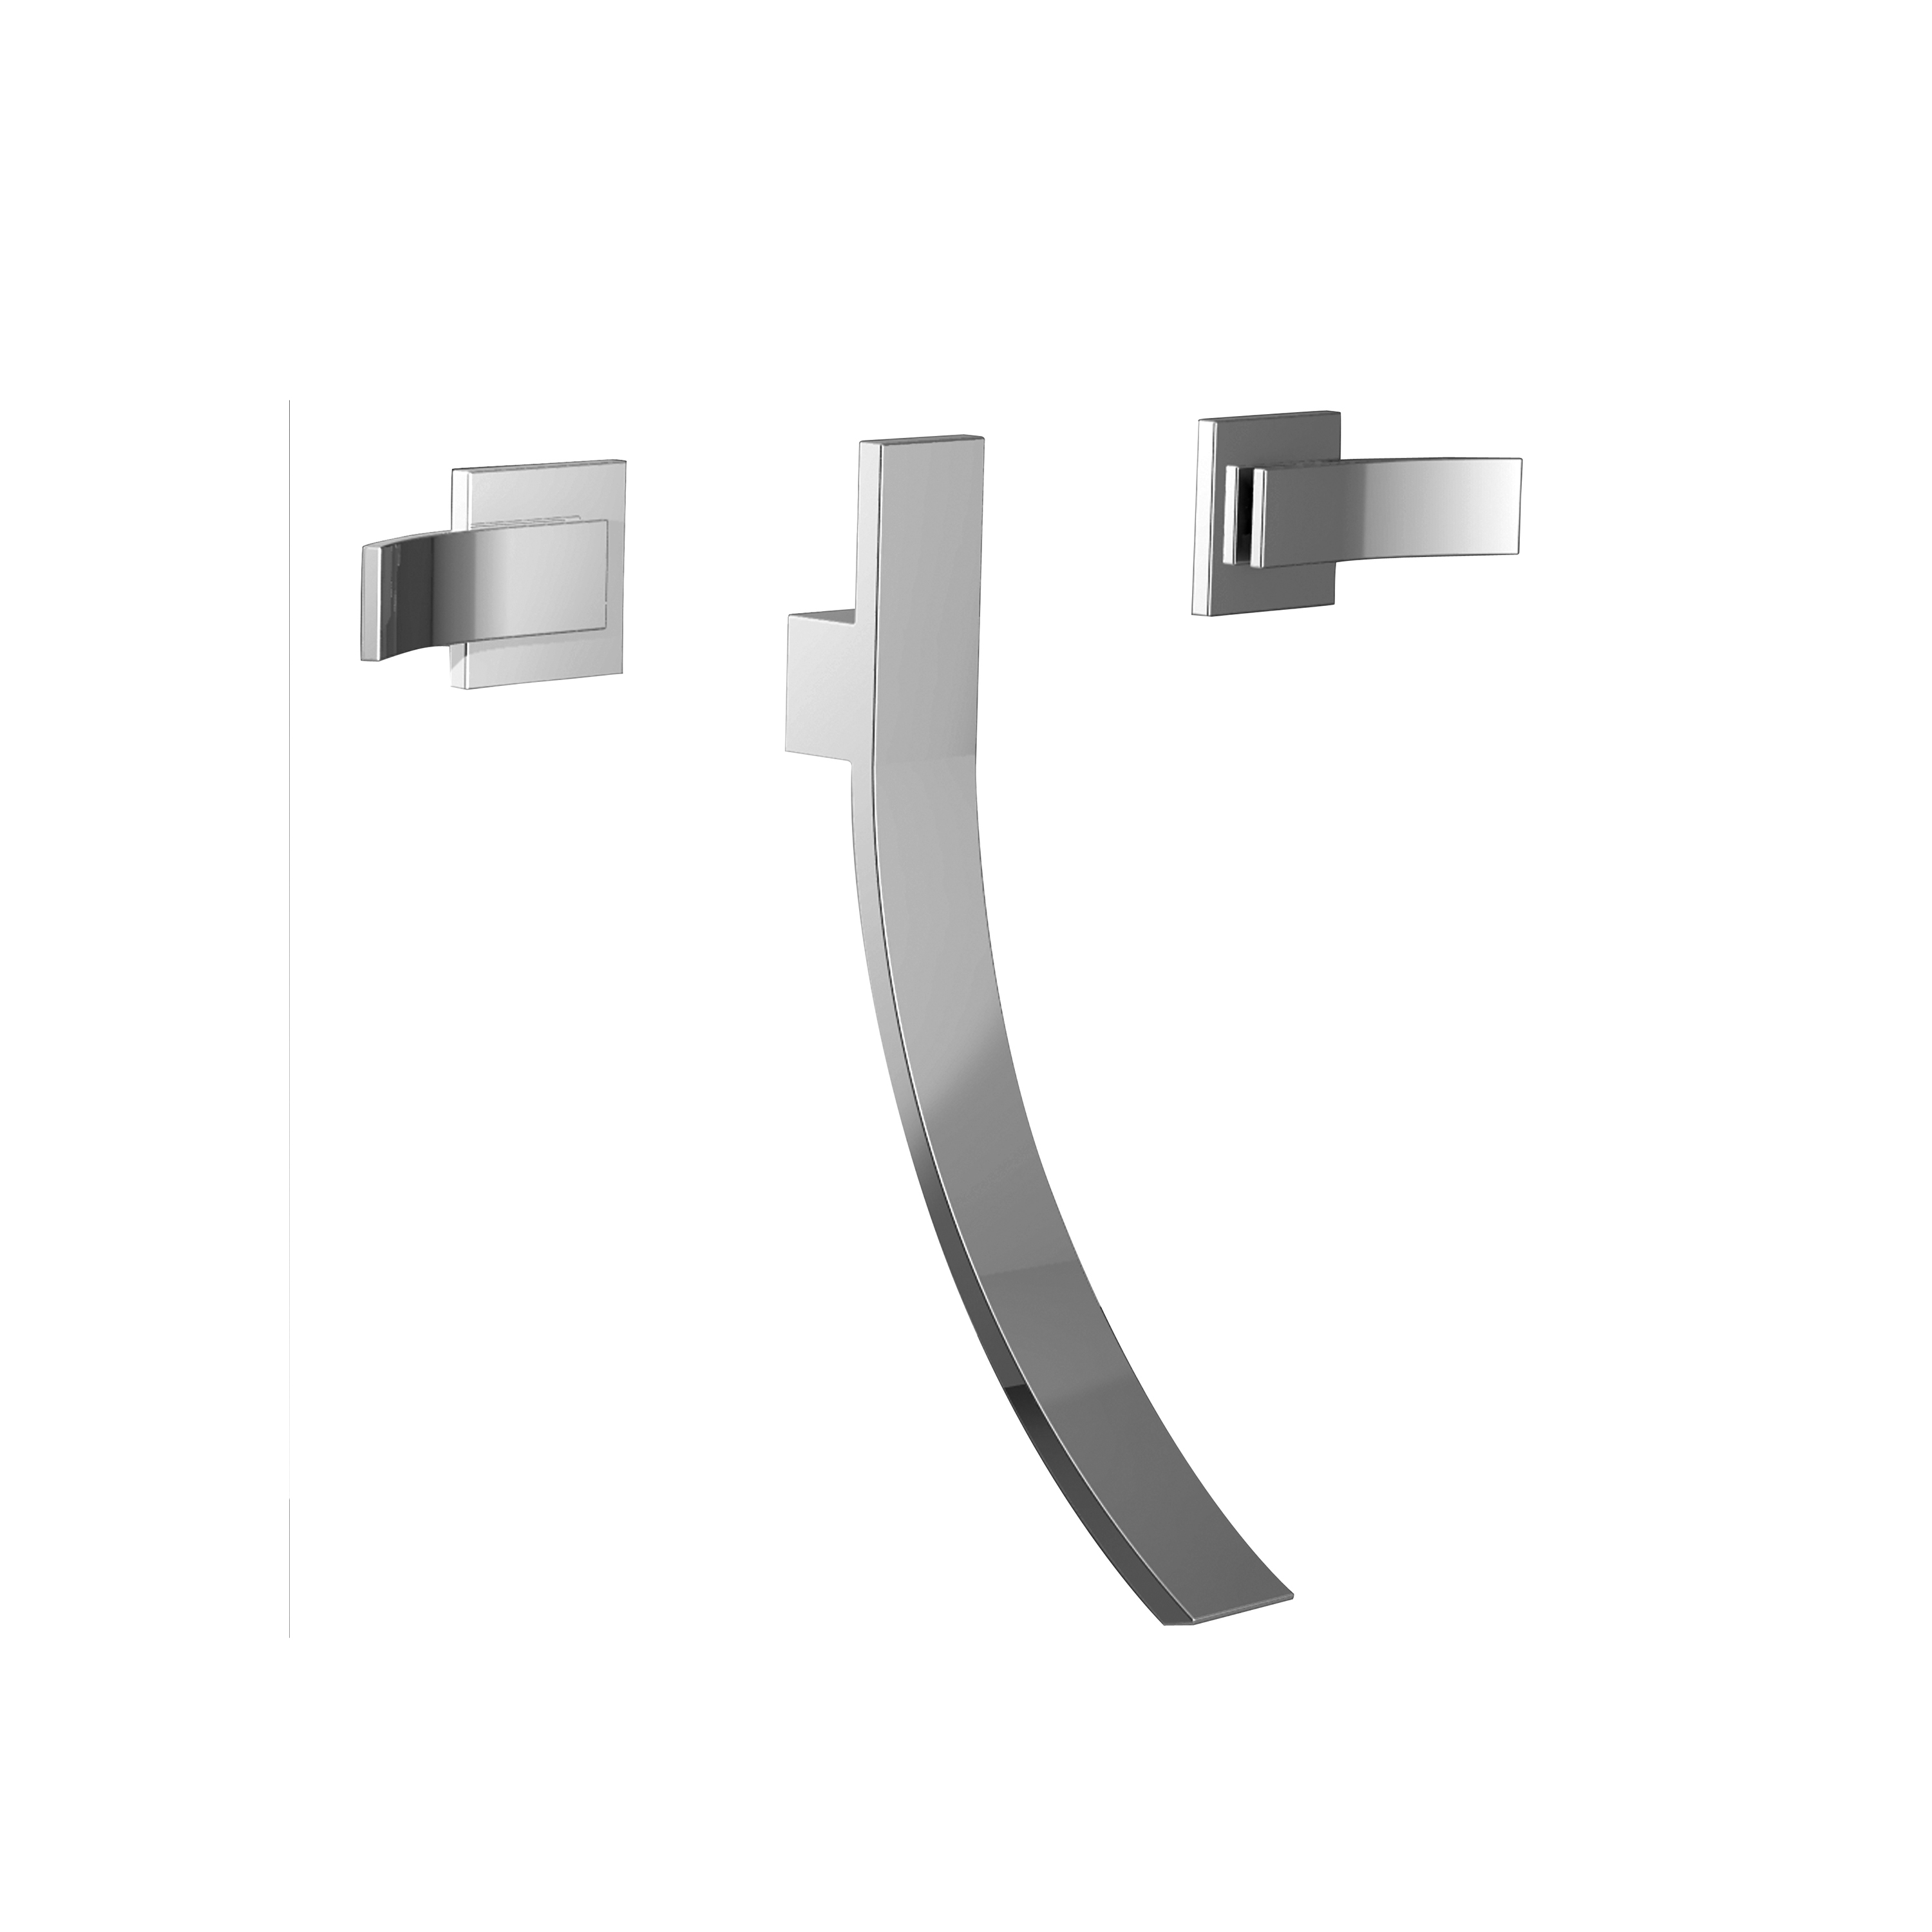 Santec 9929CU10-TM Ava Wall Mount Lavatory Widespread - Trim only with CU Handles - Polished Chrome